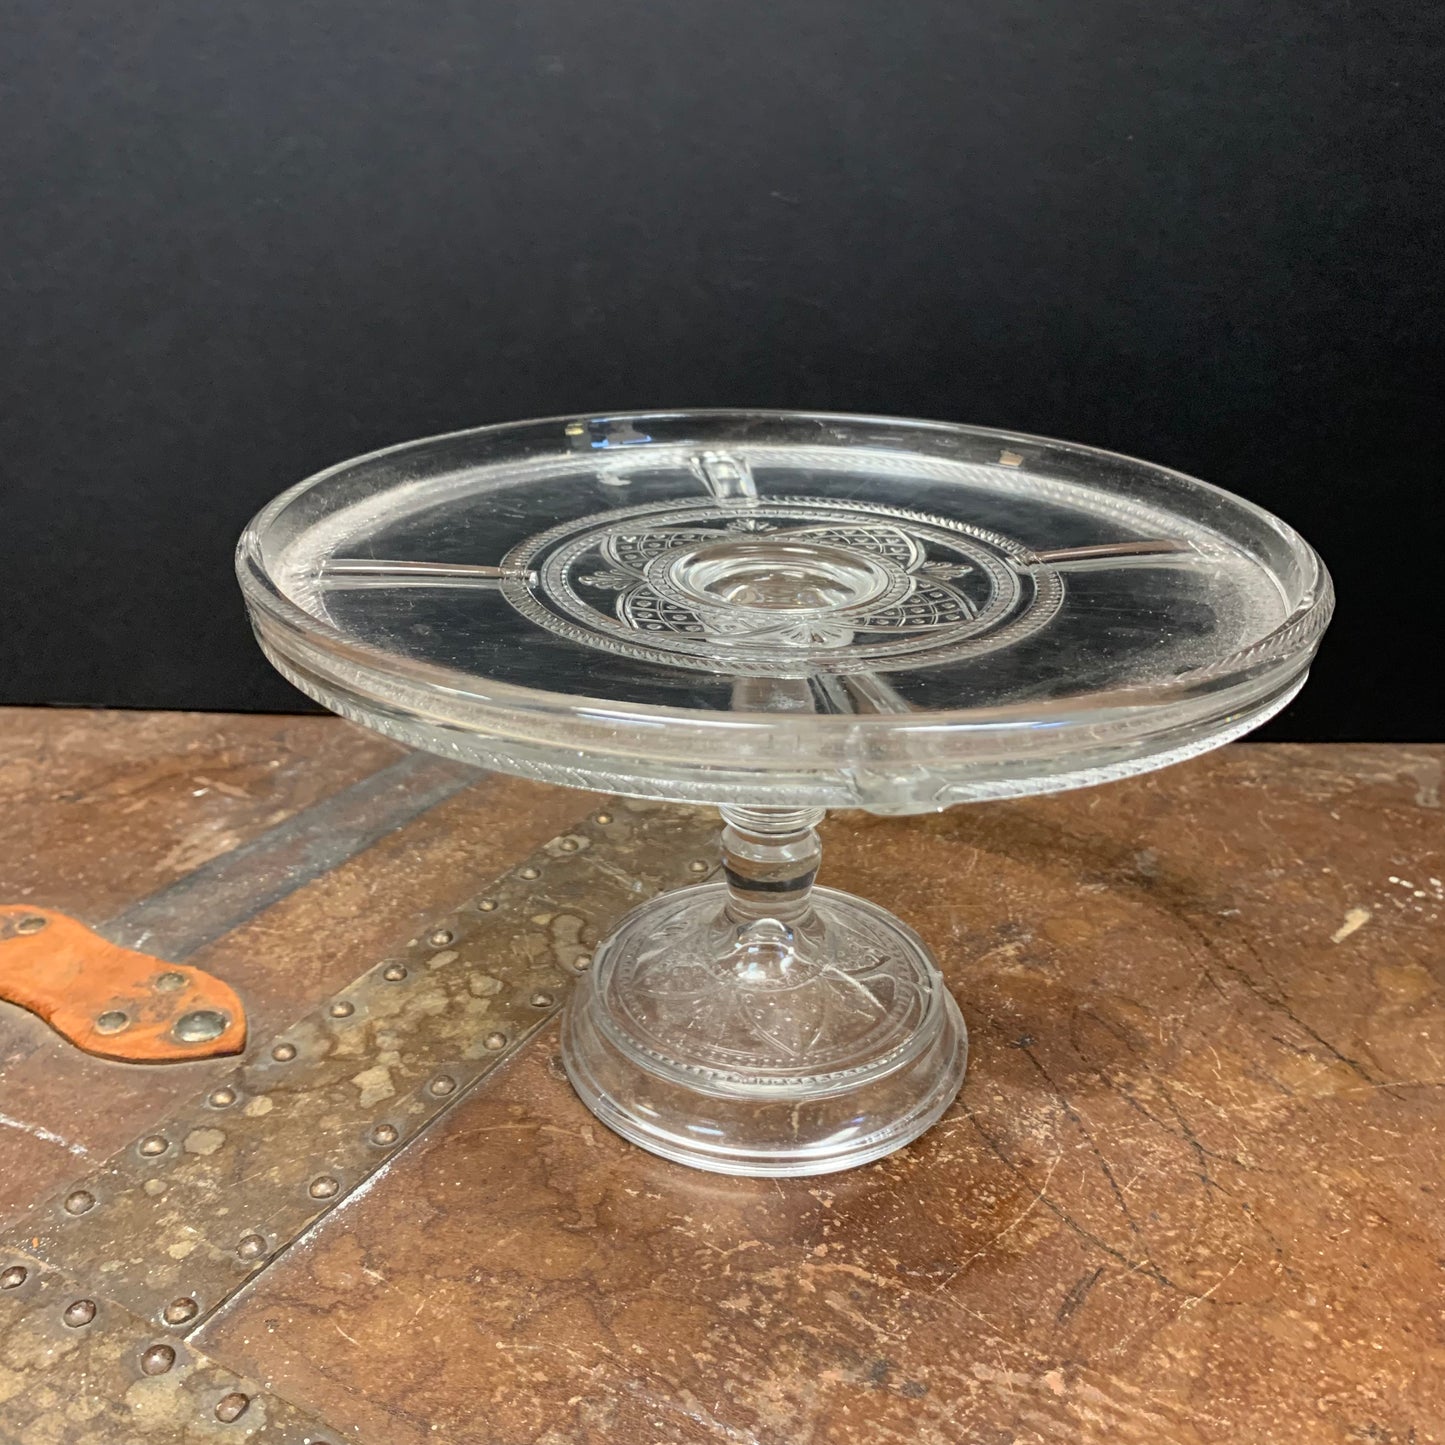 Elgort Early American Cake stand